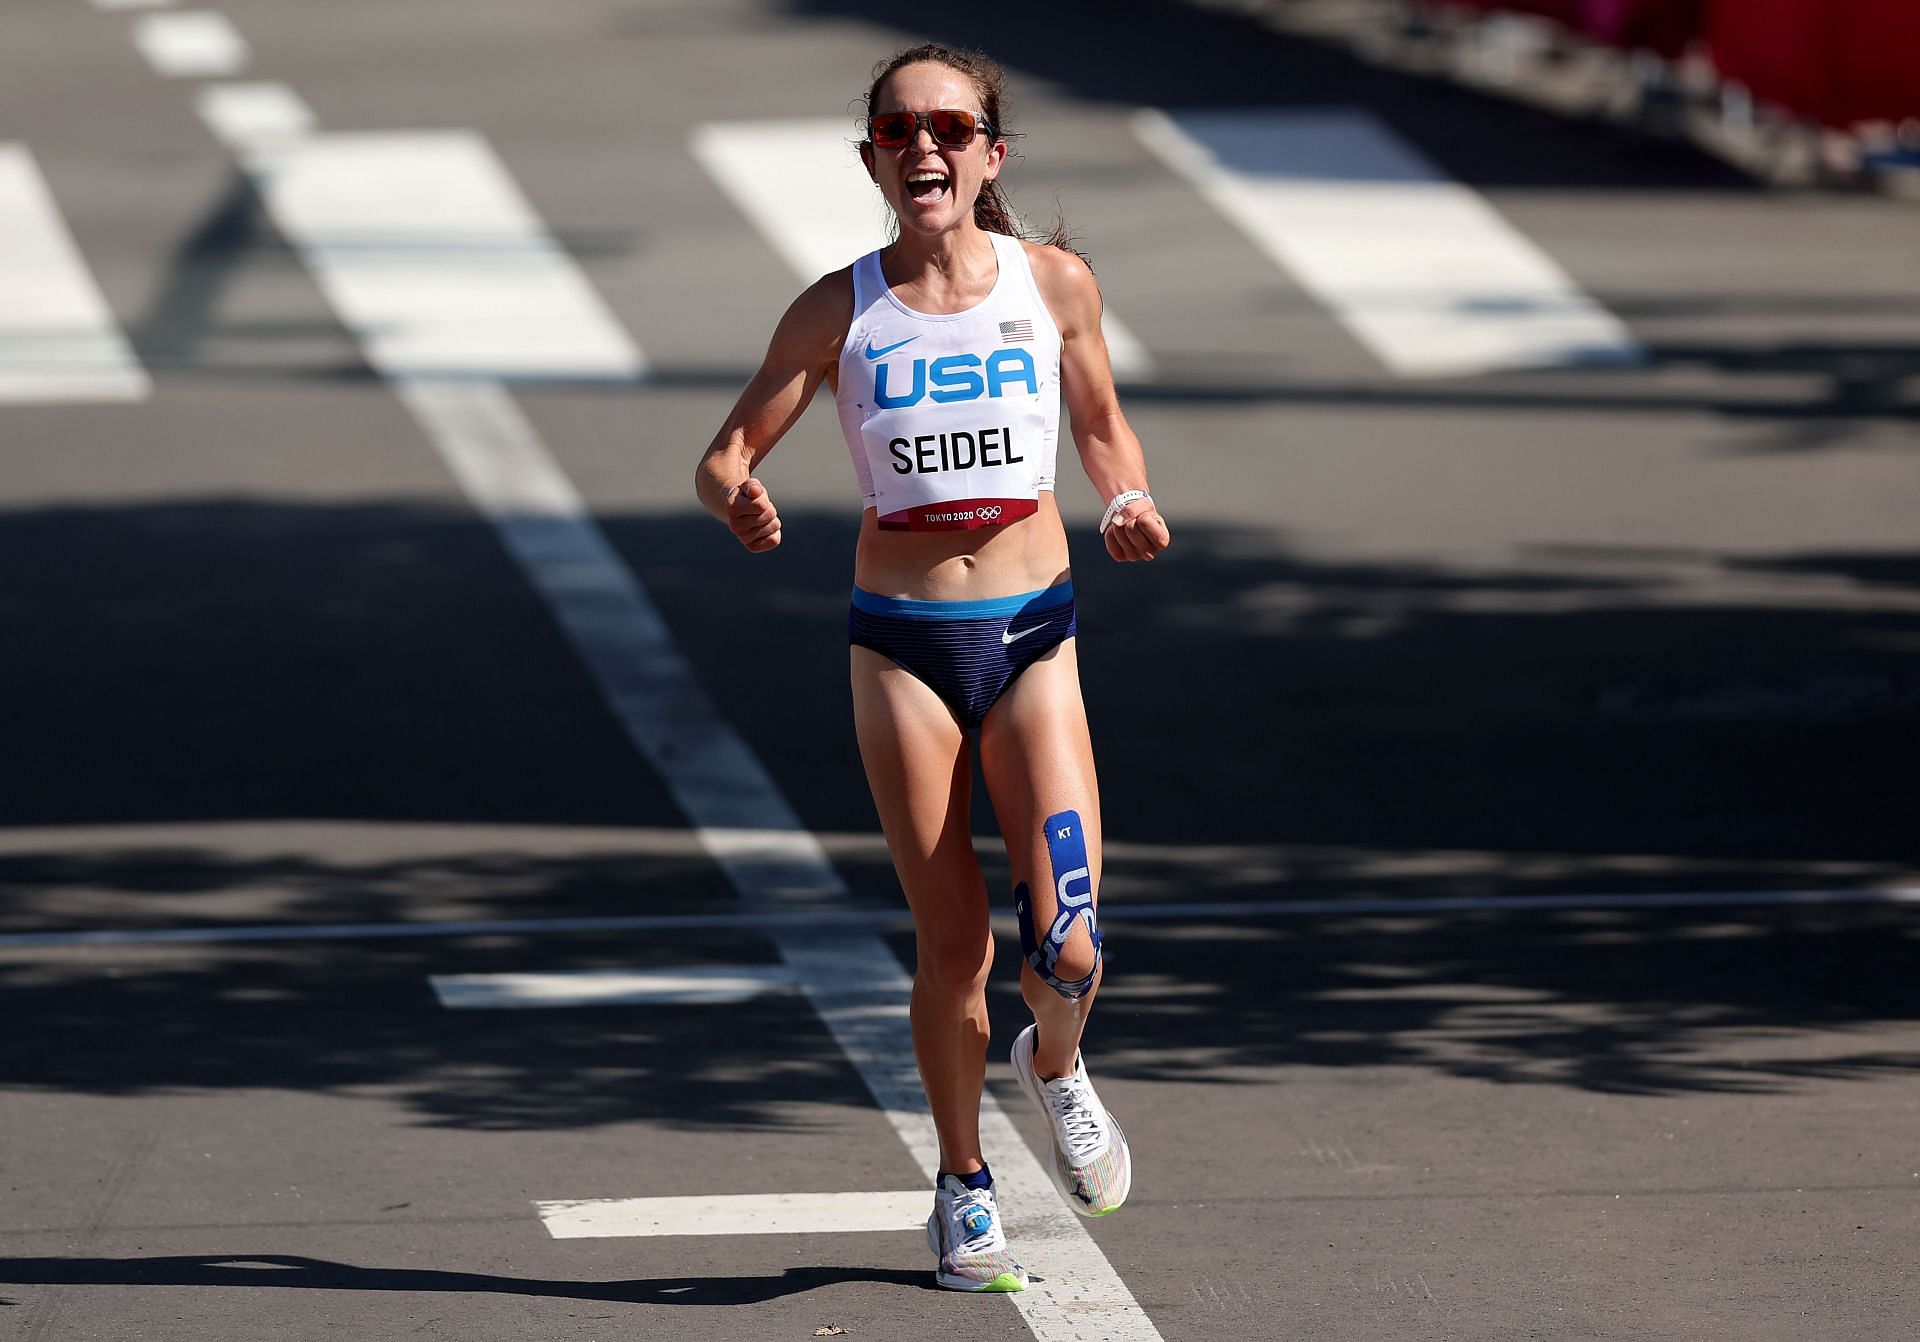 Molly Seidel clinched the bronze medal in the Women&#039;s Marathon Final at the Summer Games in Tokyo (Photo by Lintao Zhang/Getty Images)